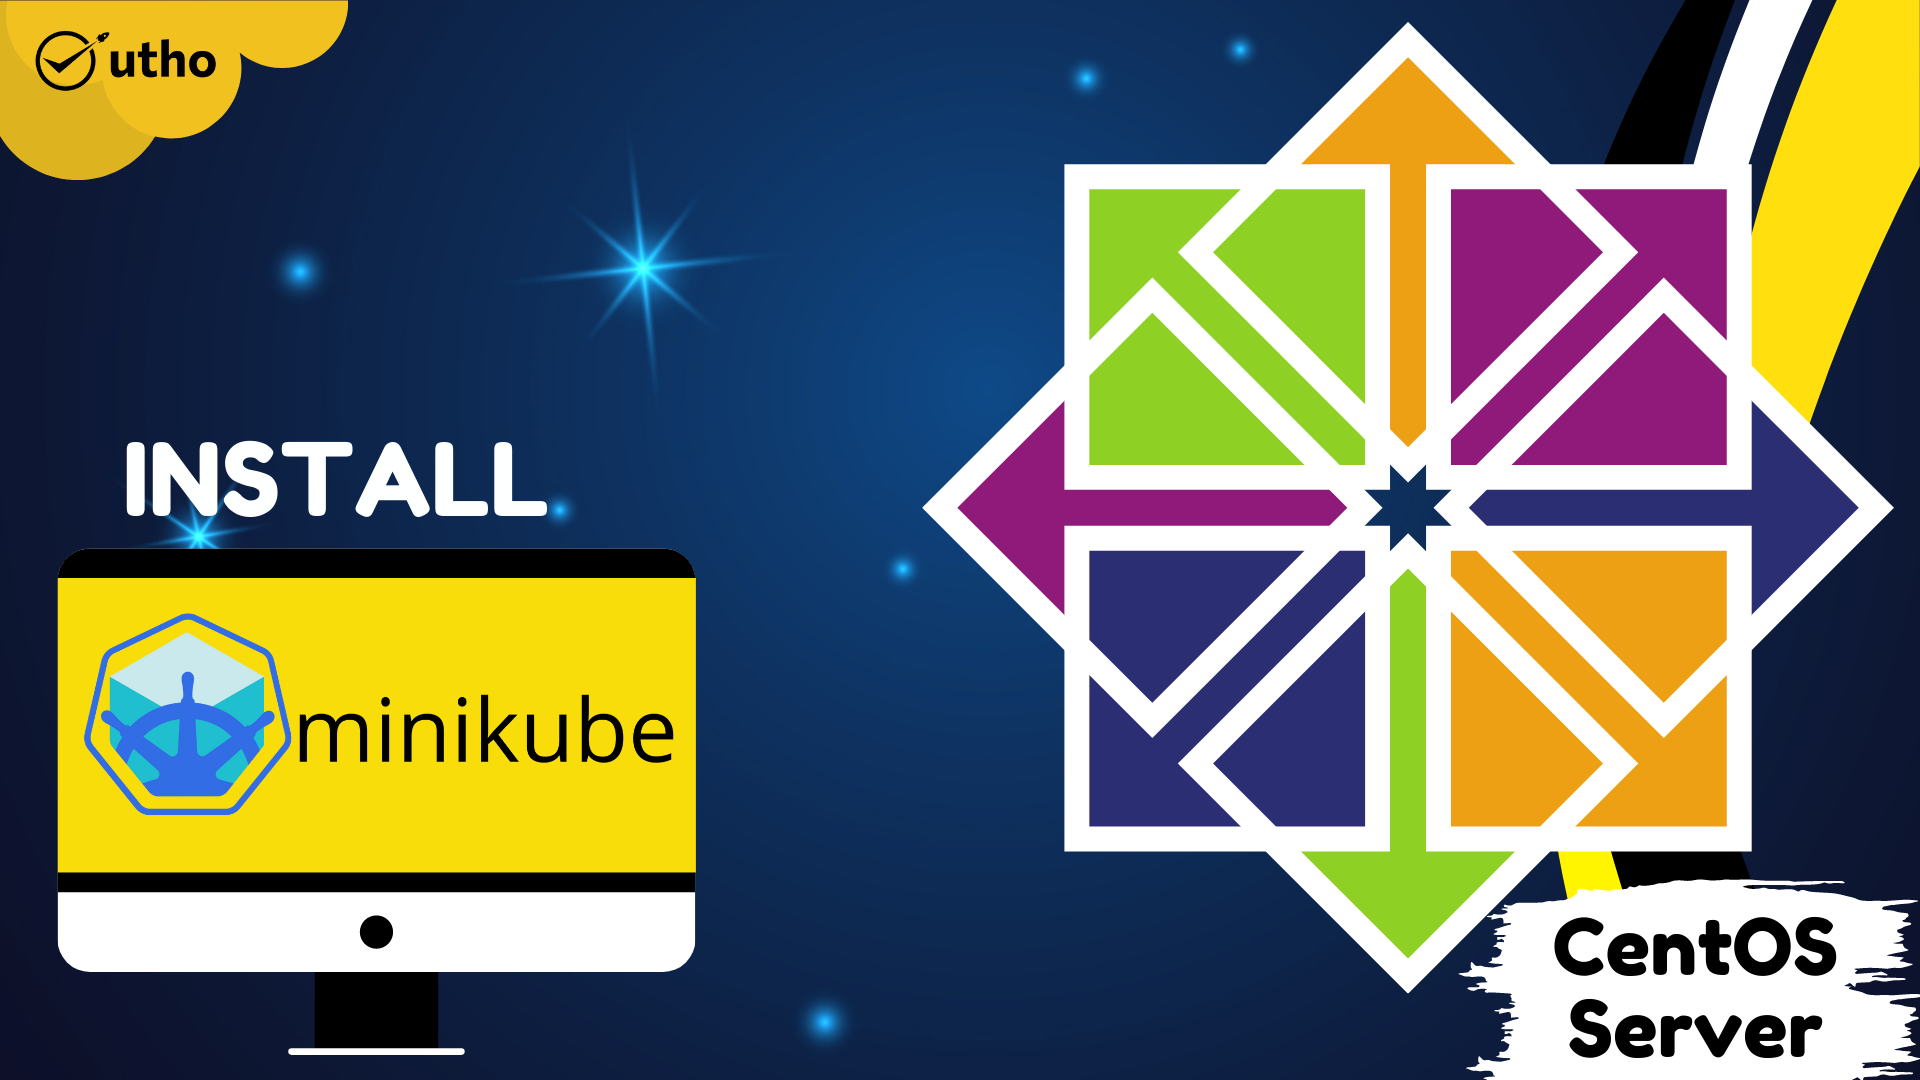 How to install Minikube on CentOS 7 and 8